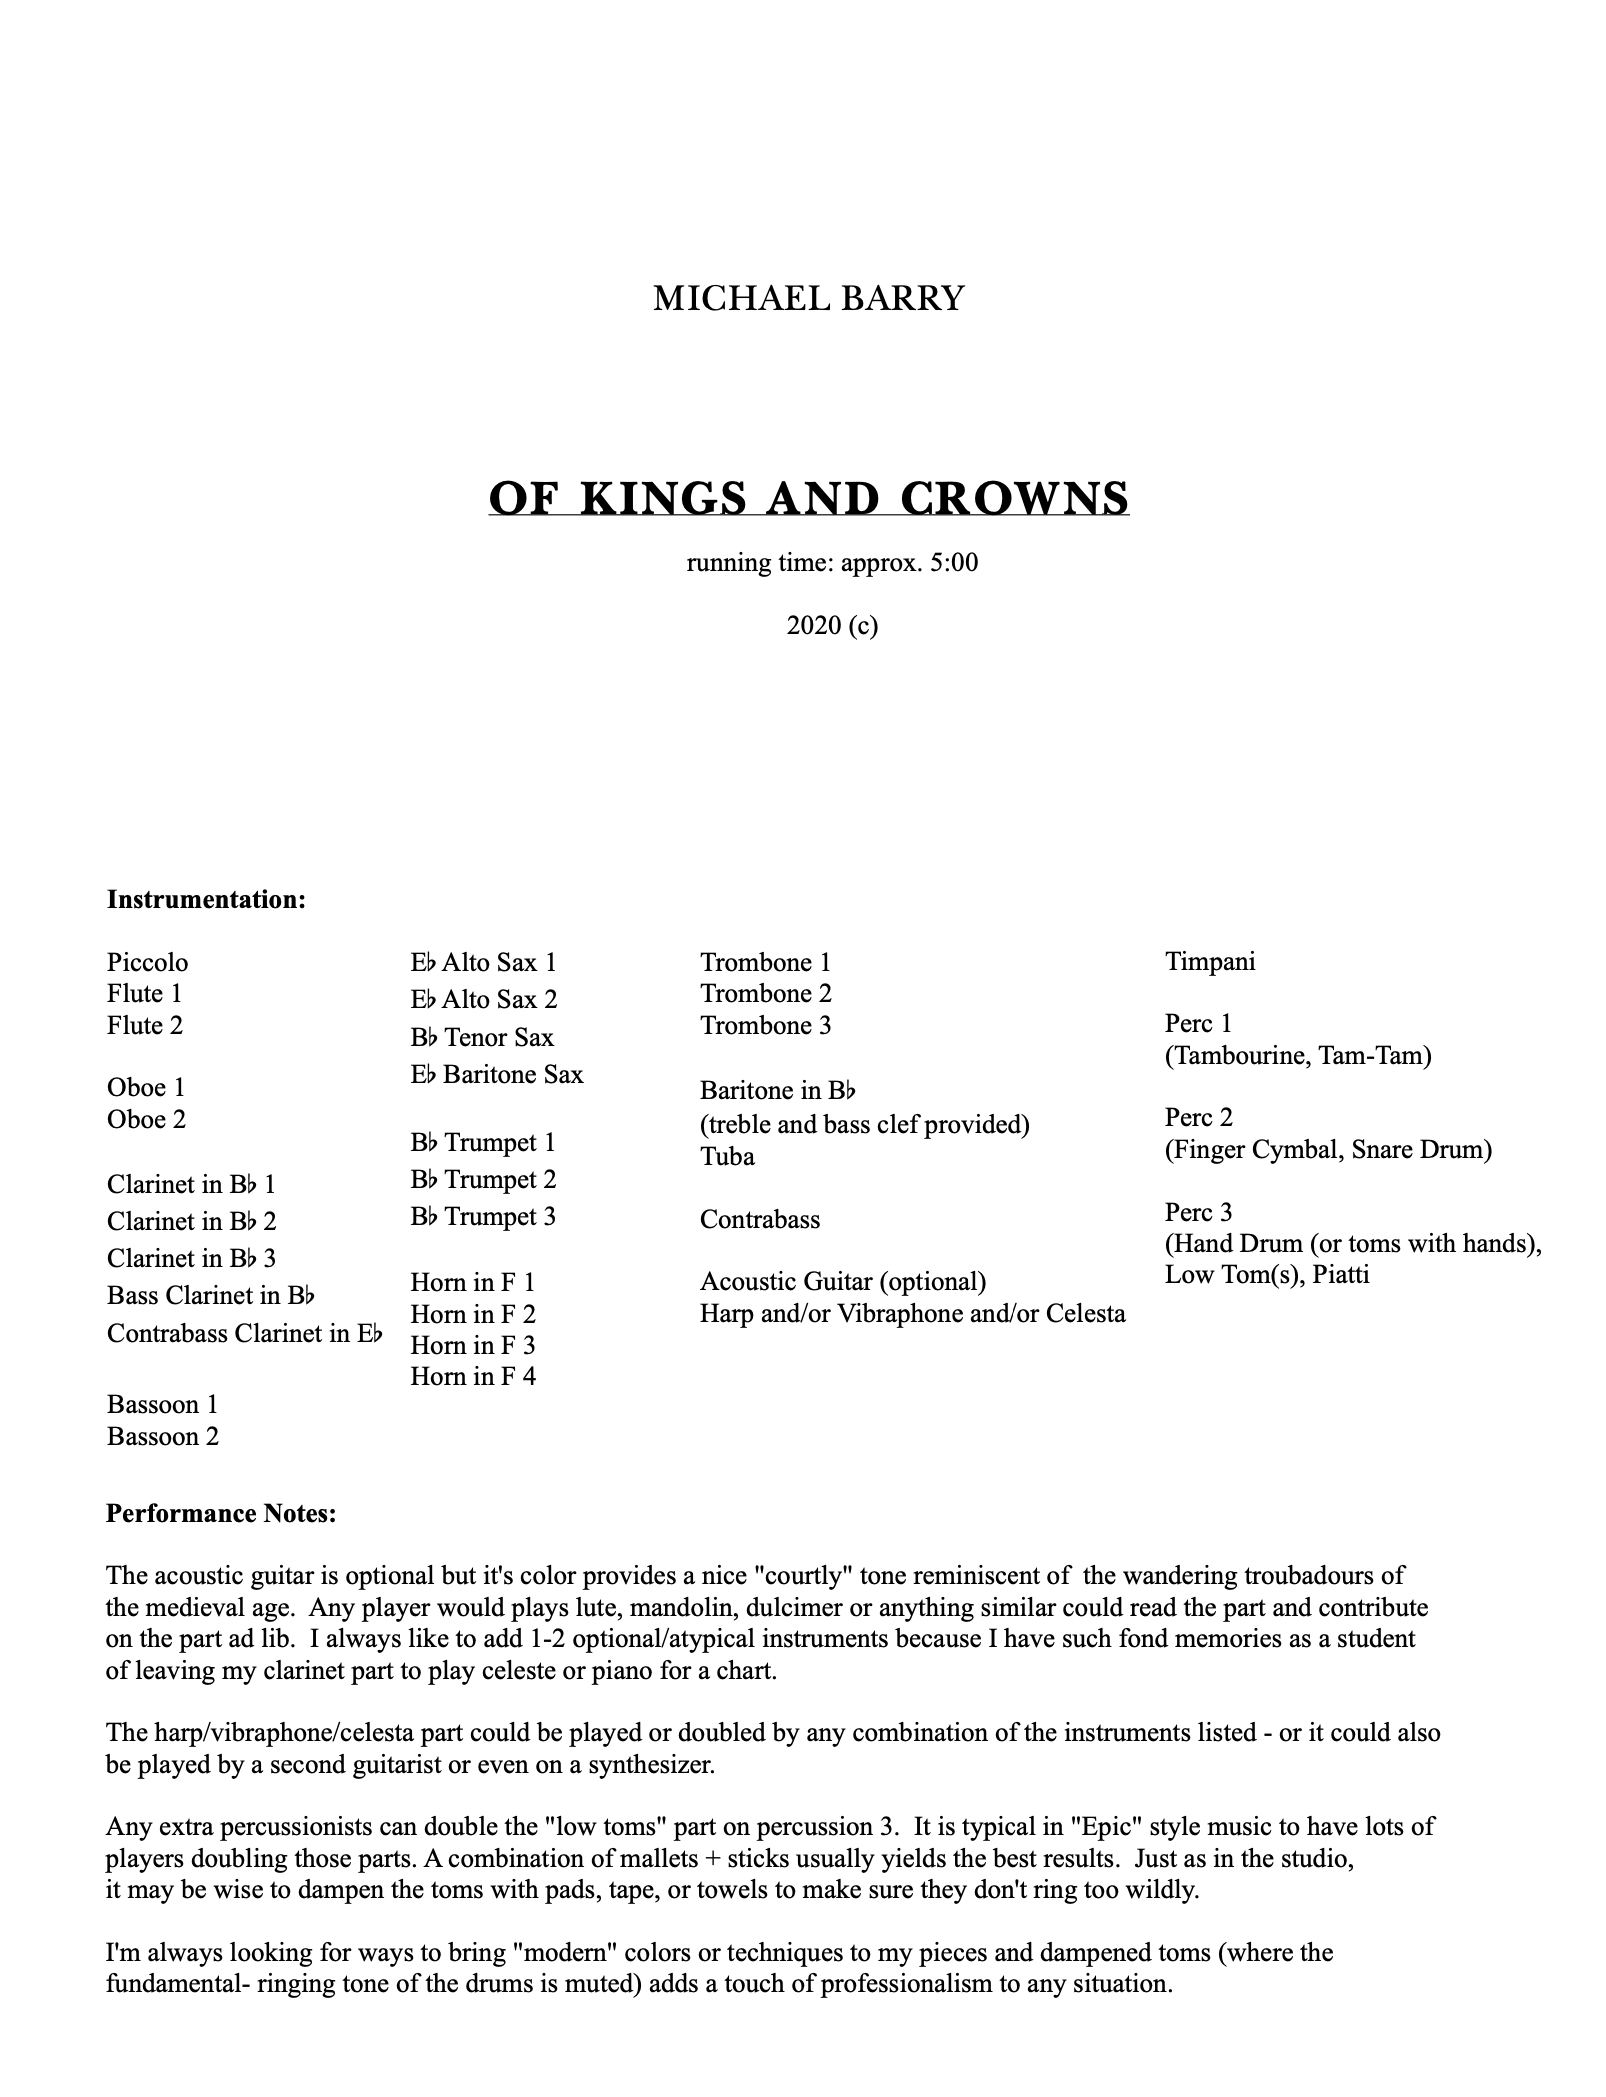 Of Kings And Crowns by Michael Barry